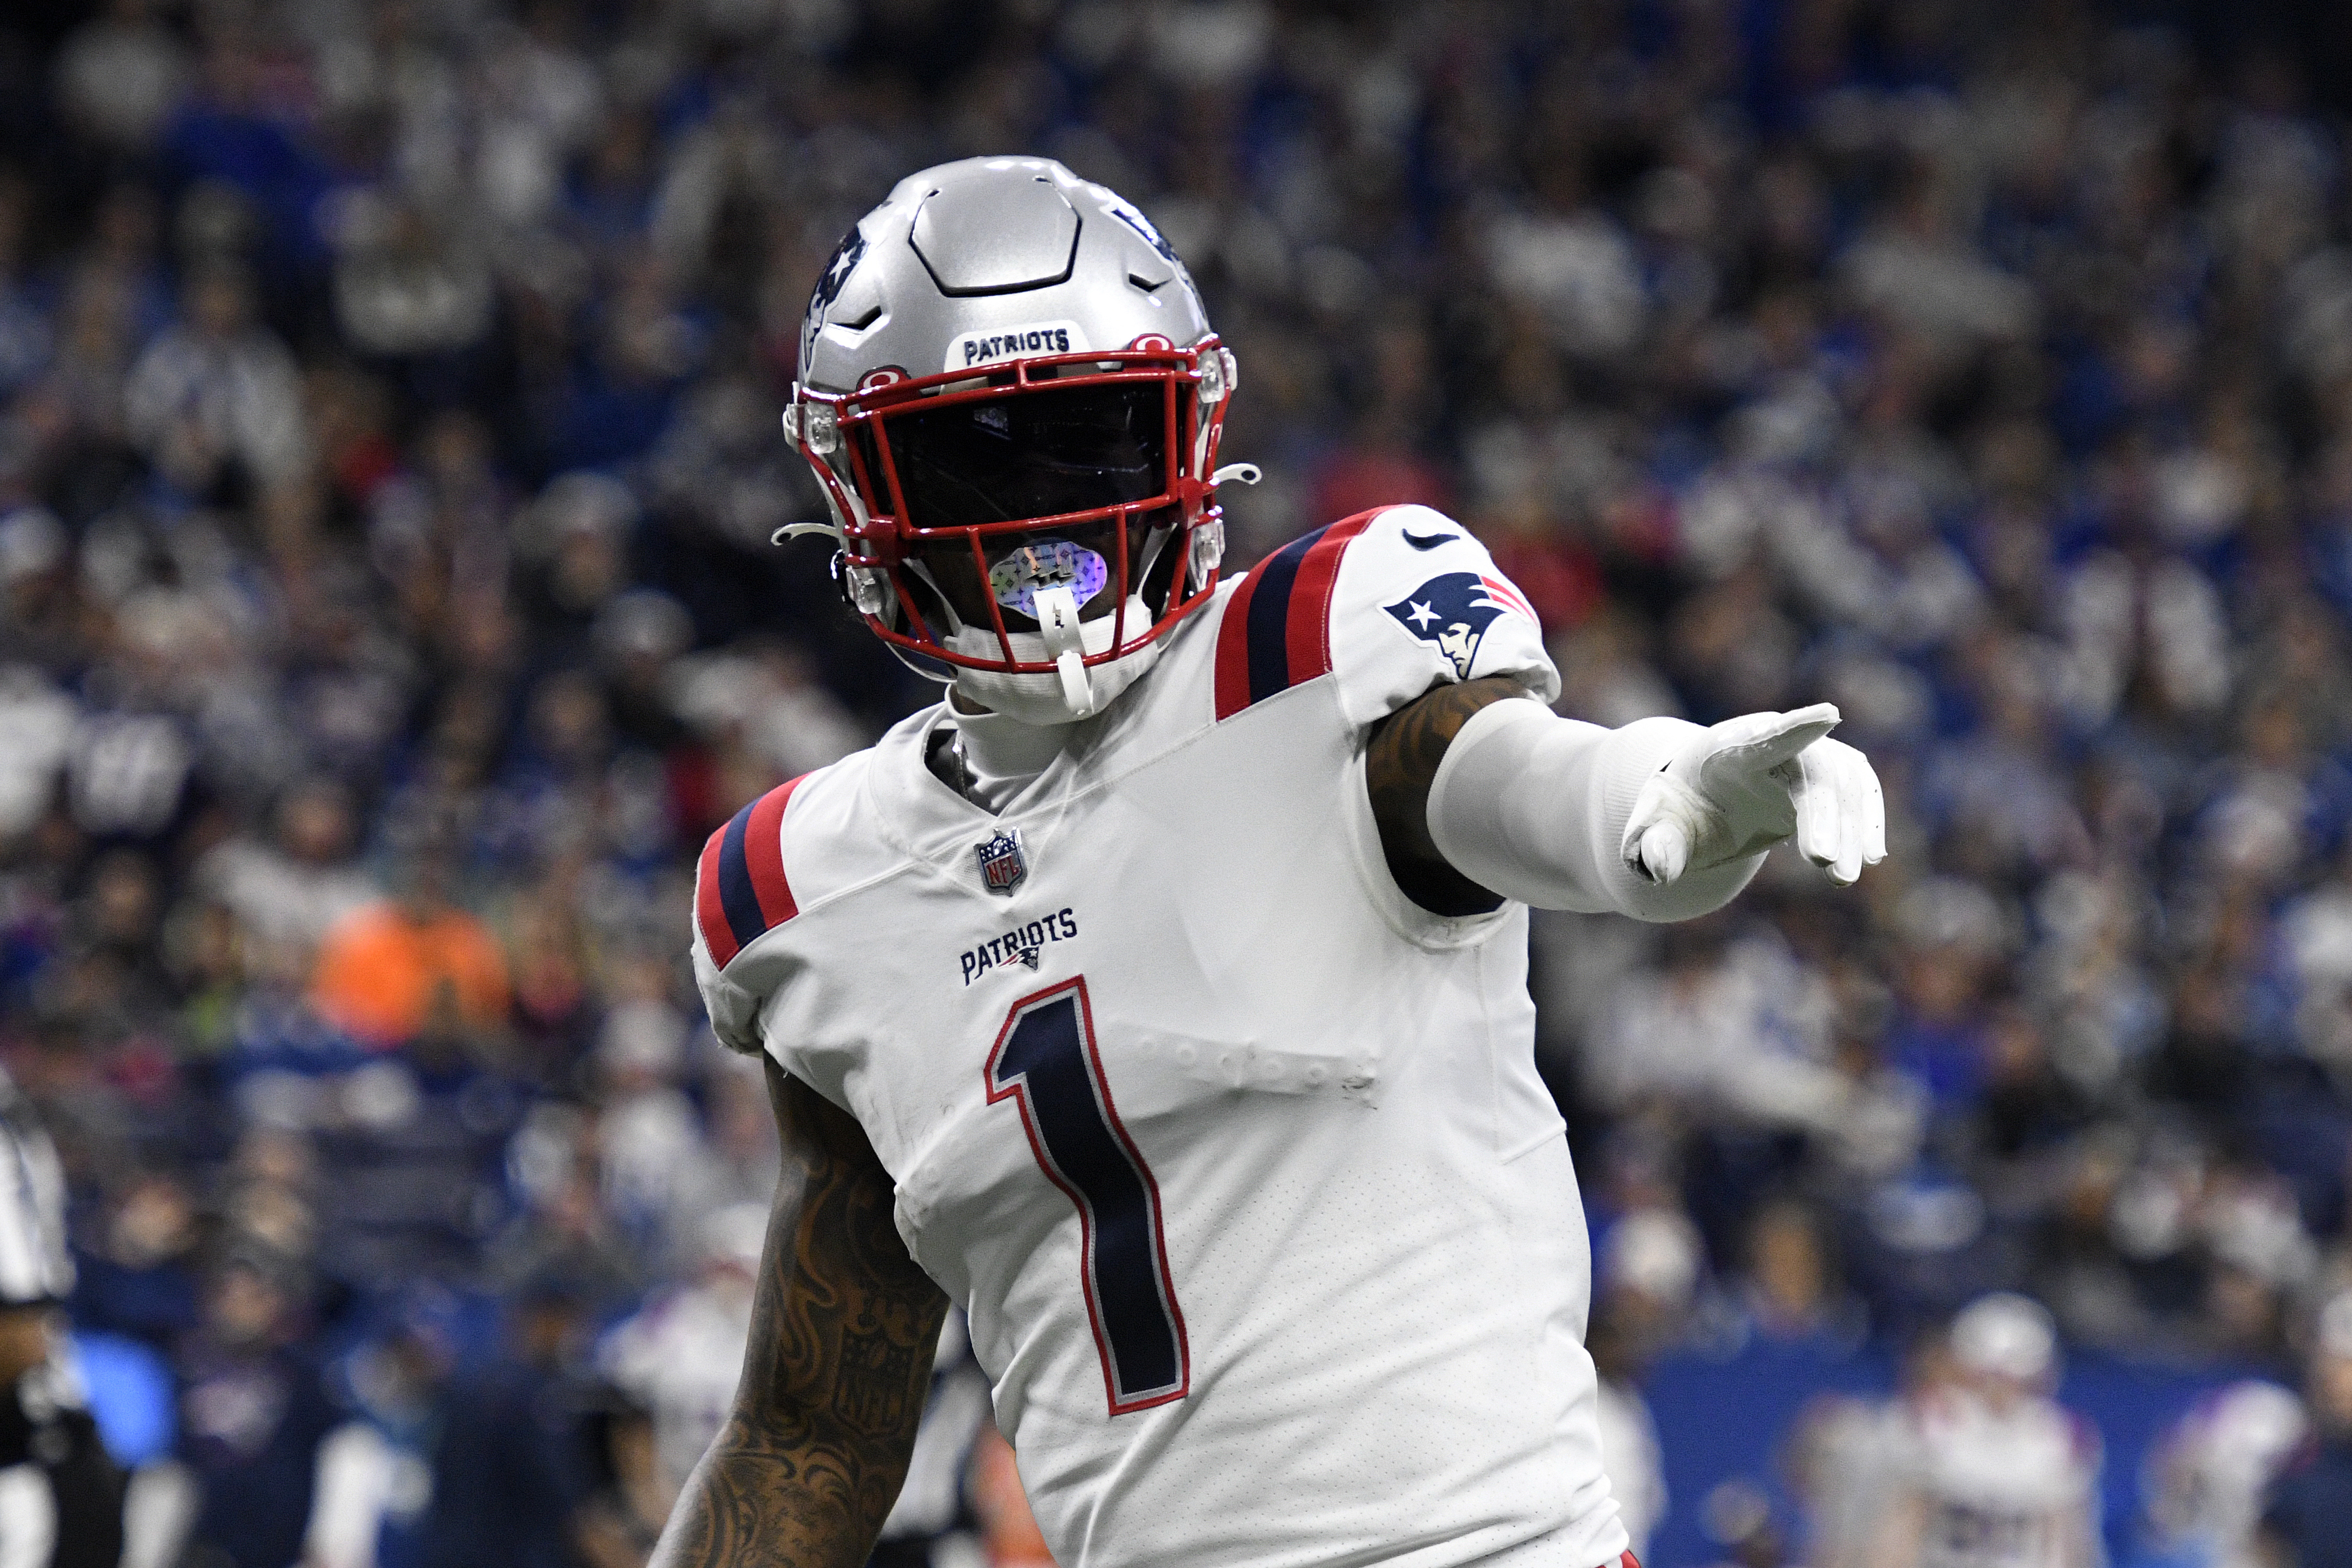 N'Keal Harry has not been productive in three seasons with New England